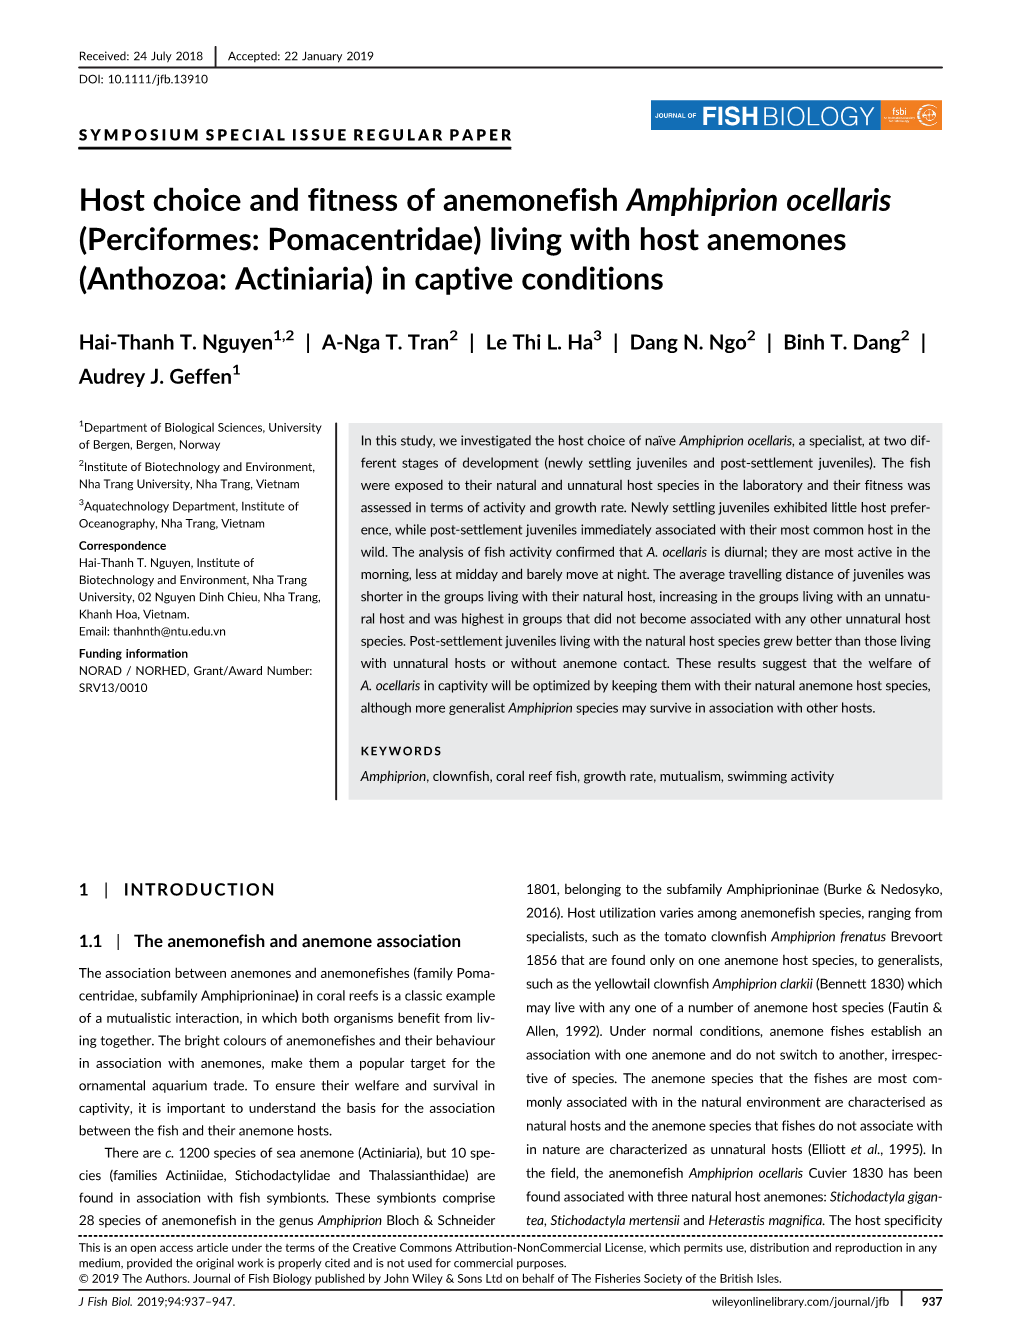 Host Choice and Fitness of Anemonefish Amphiprion Ocellaris (Perciformes: Pomacentridae) Living with Host Anemones (Anthozoa: Actiniaria) in Captive Conditions